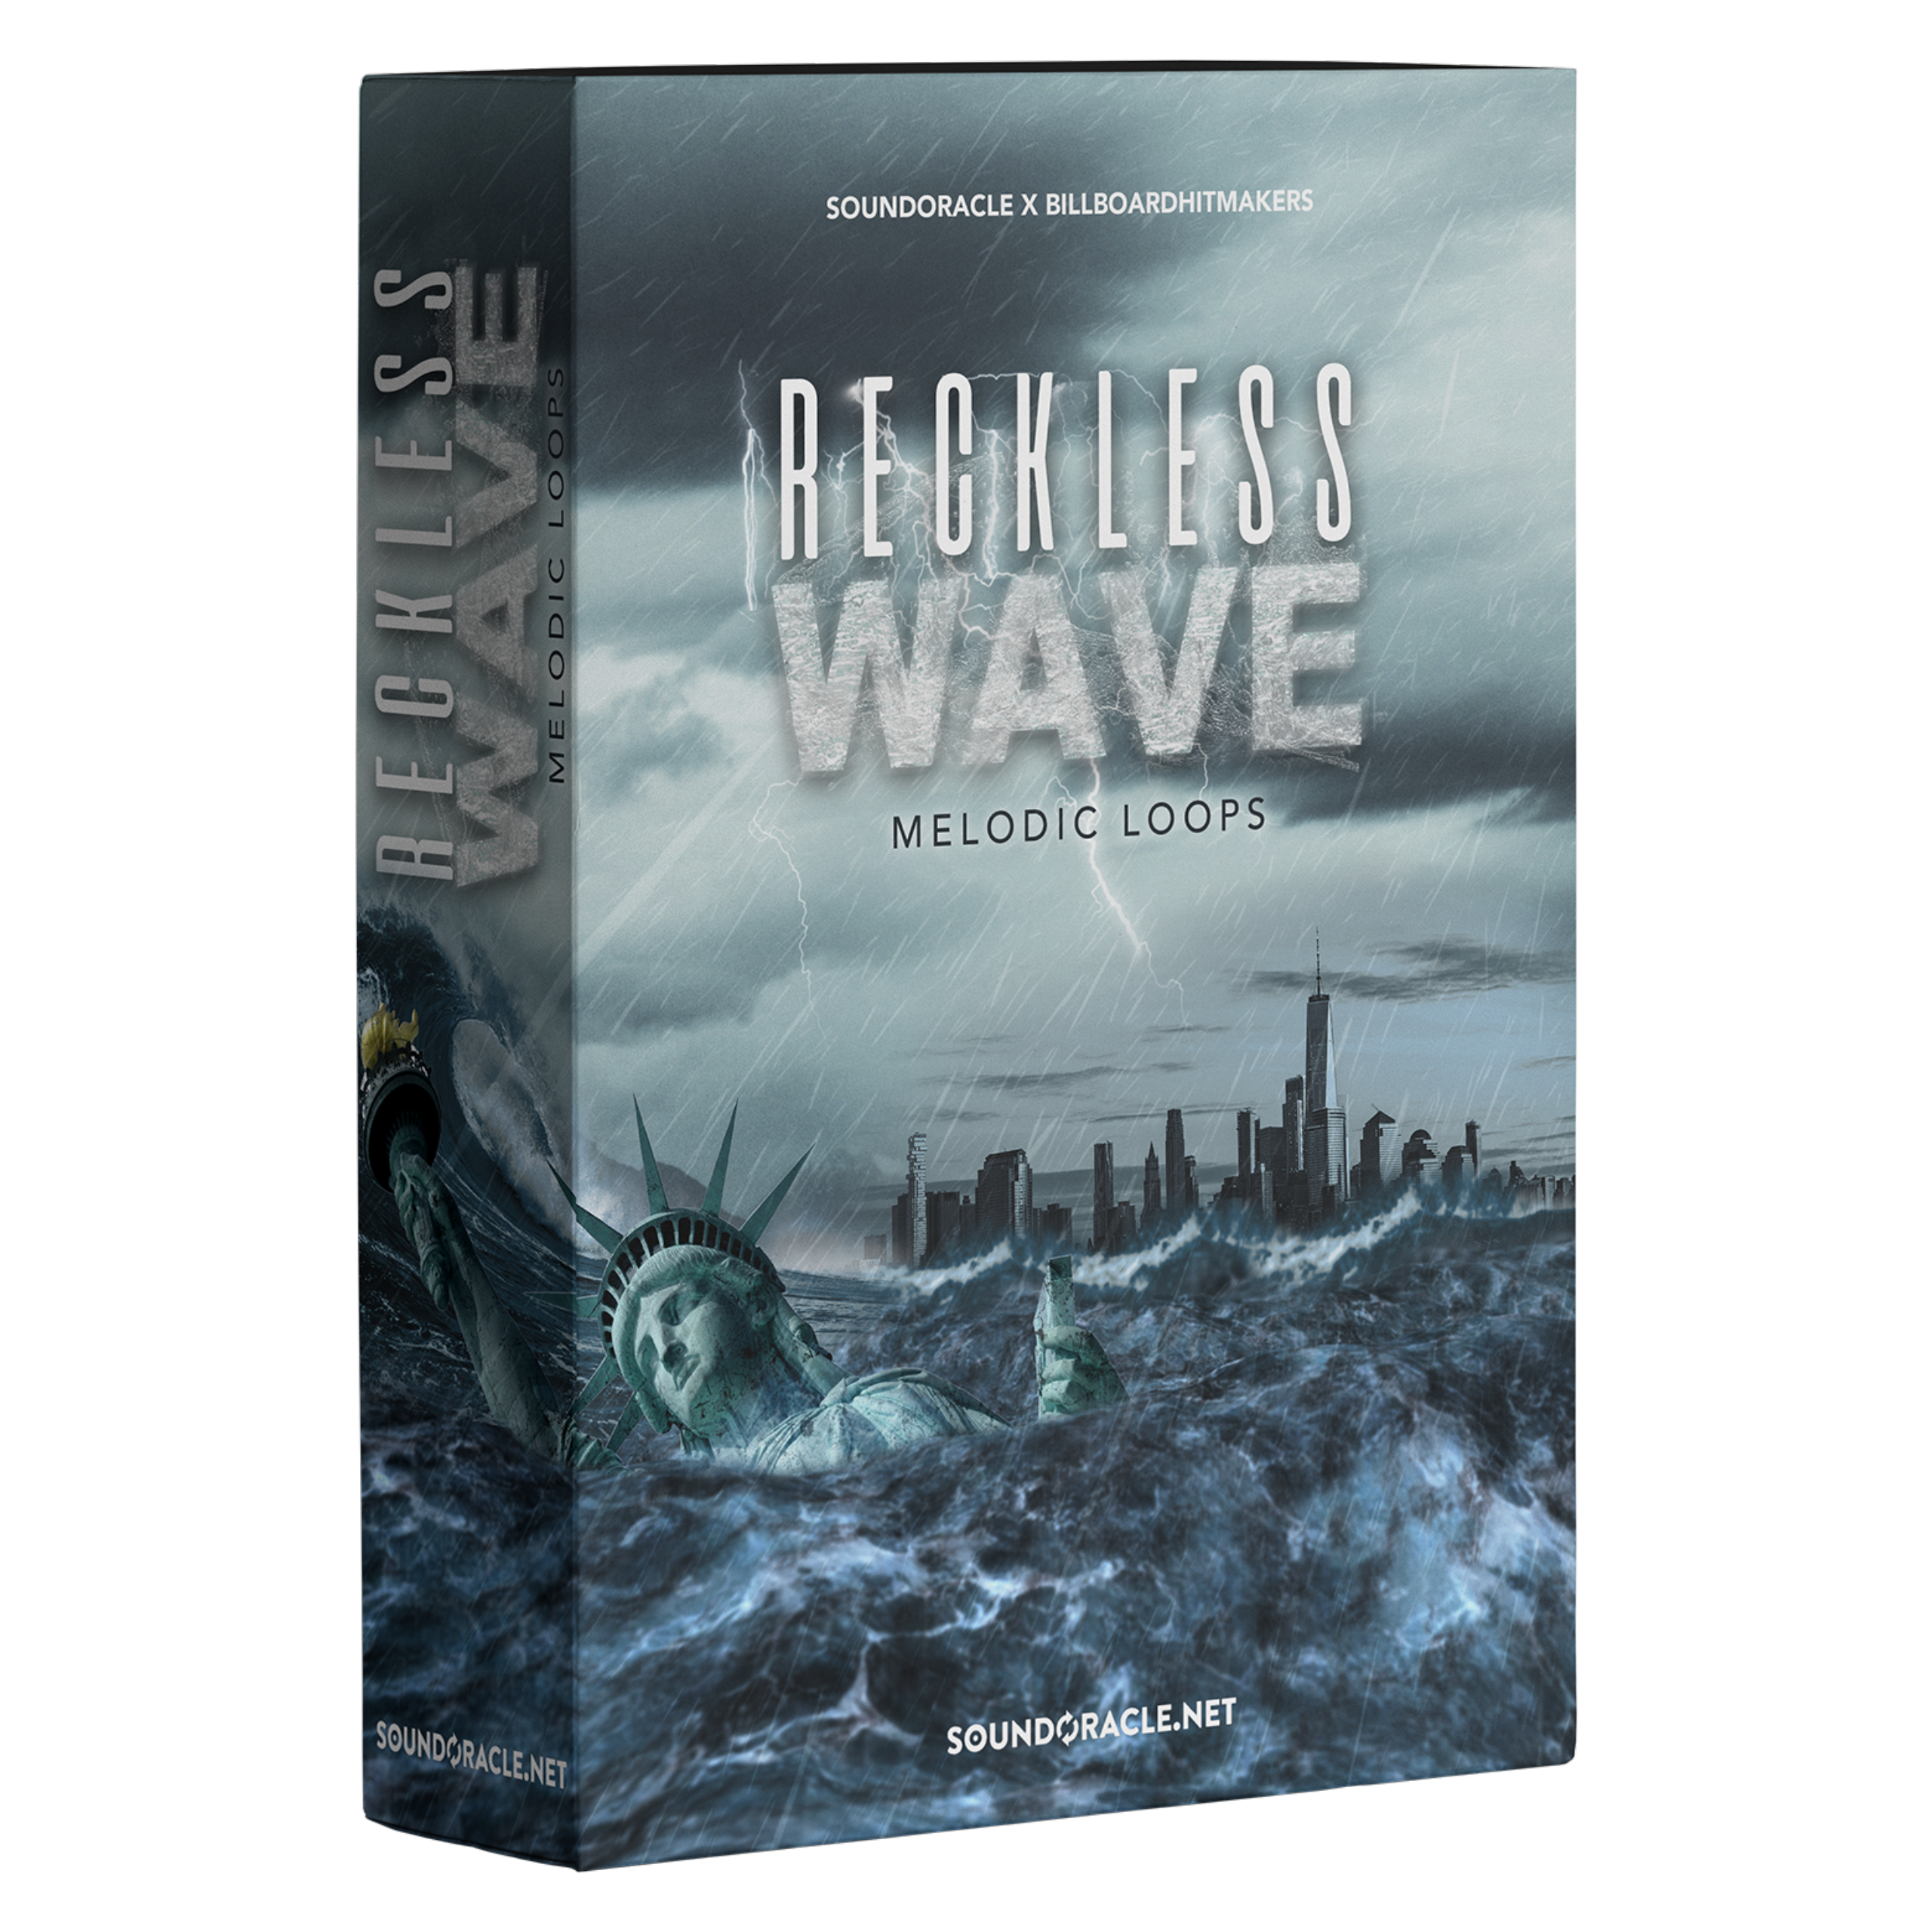 Reckless Wave Melodic Loops – New Sound Kit by SoundOracle and Billboard Hit Makers